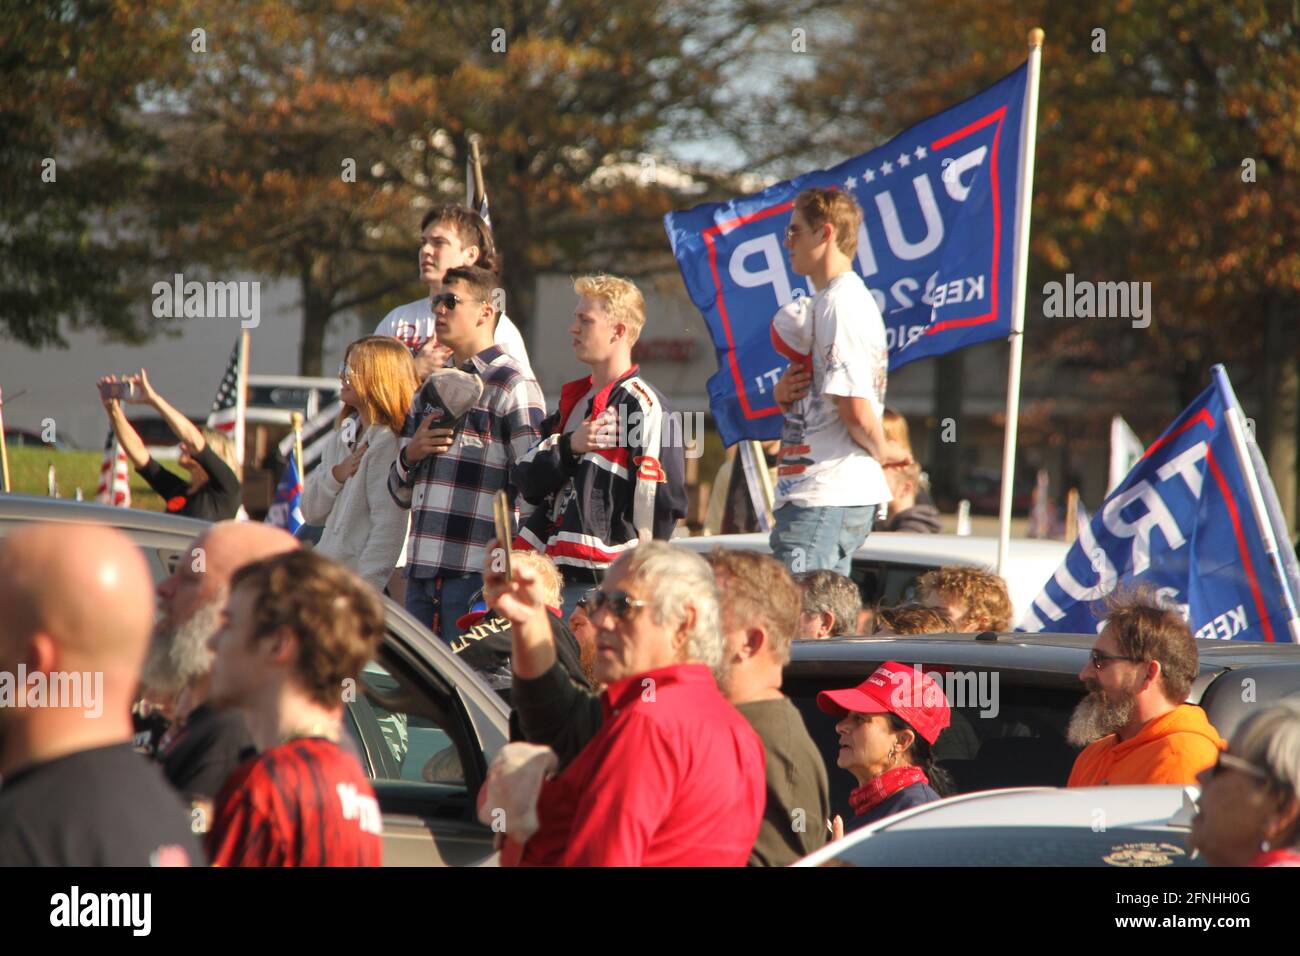 November 2020, Virginia, USA. Trump supporters standing for the national anthem during a political event. Stock Photo